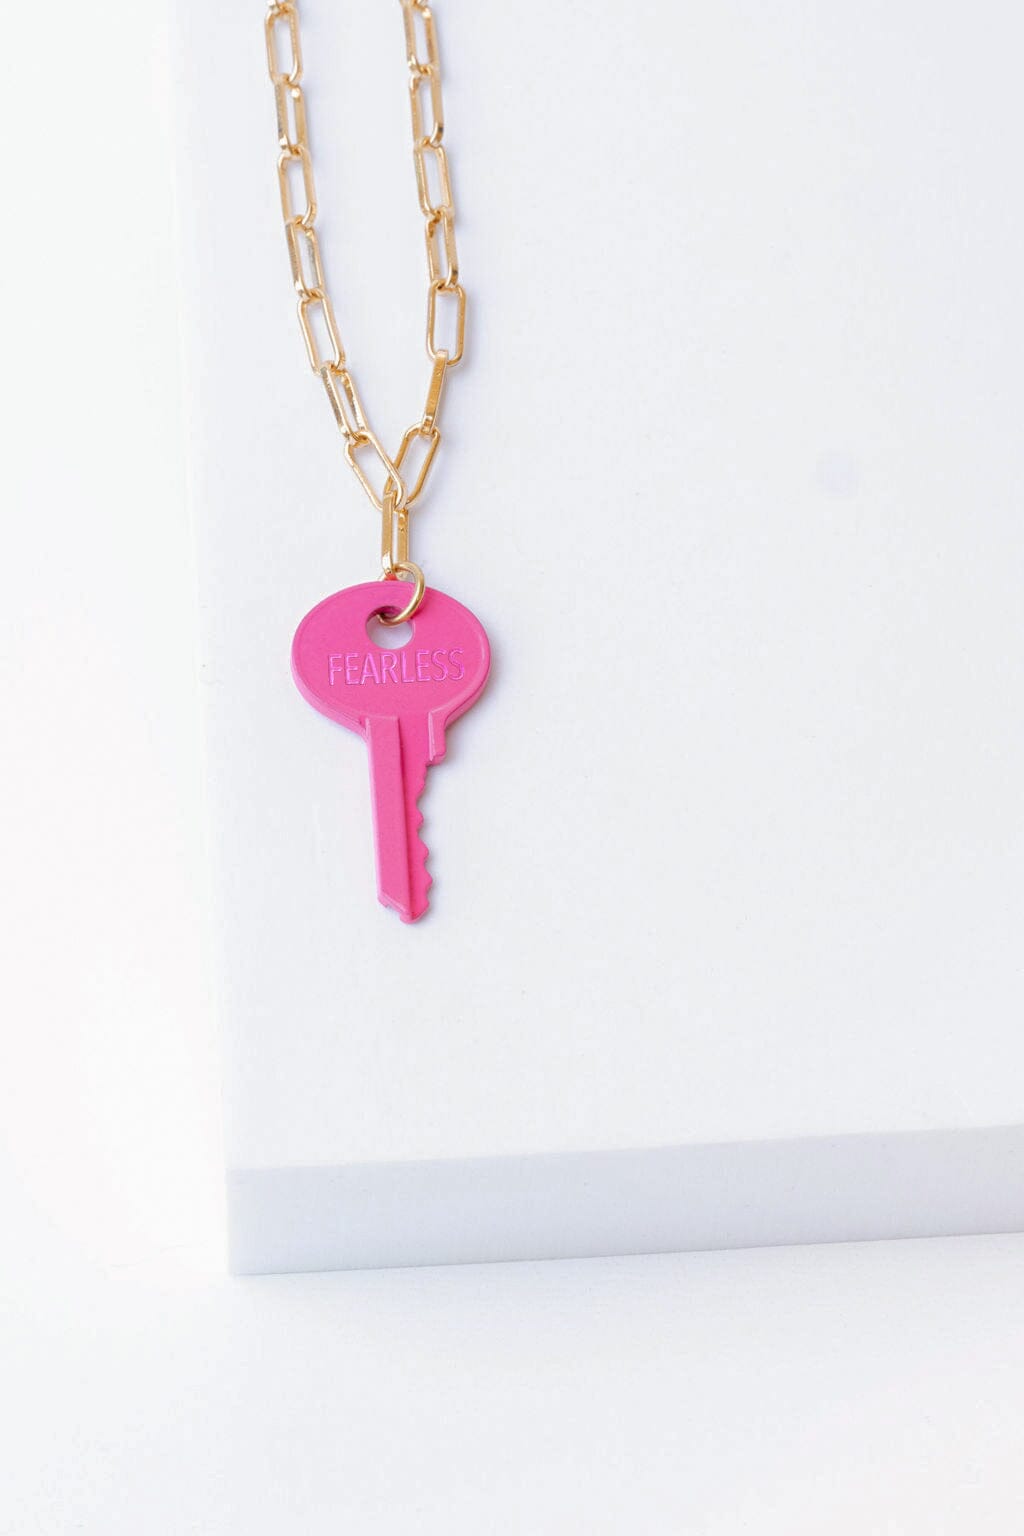 N - Hot Pink Dainty Brooklyn Necklace Necklaces The Giving Keys 